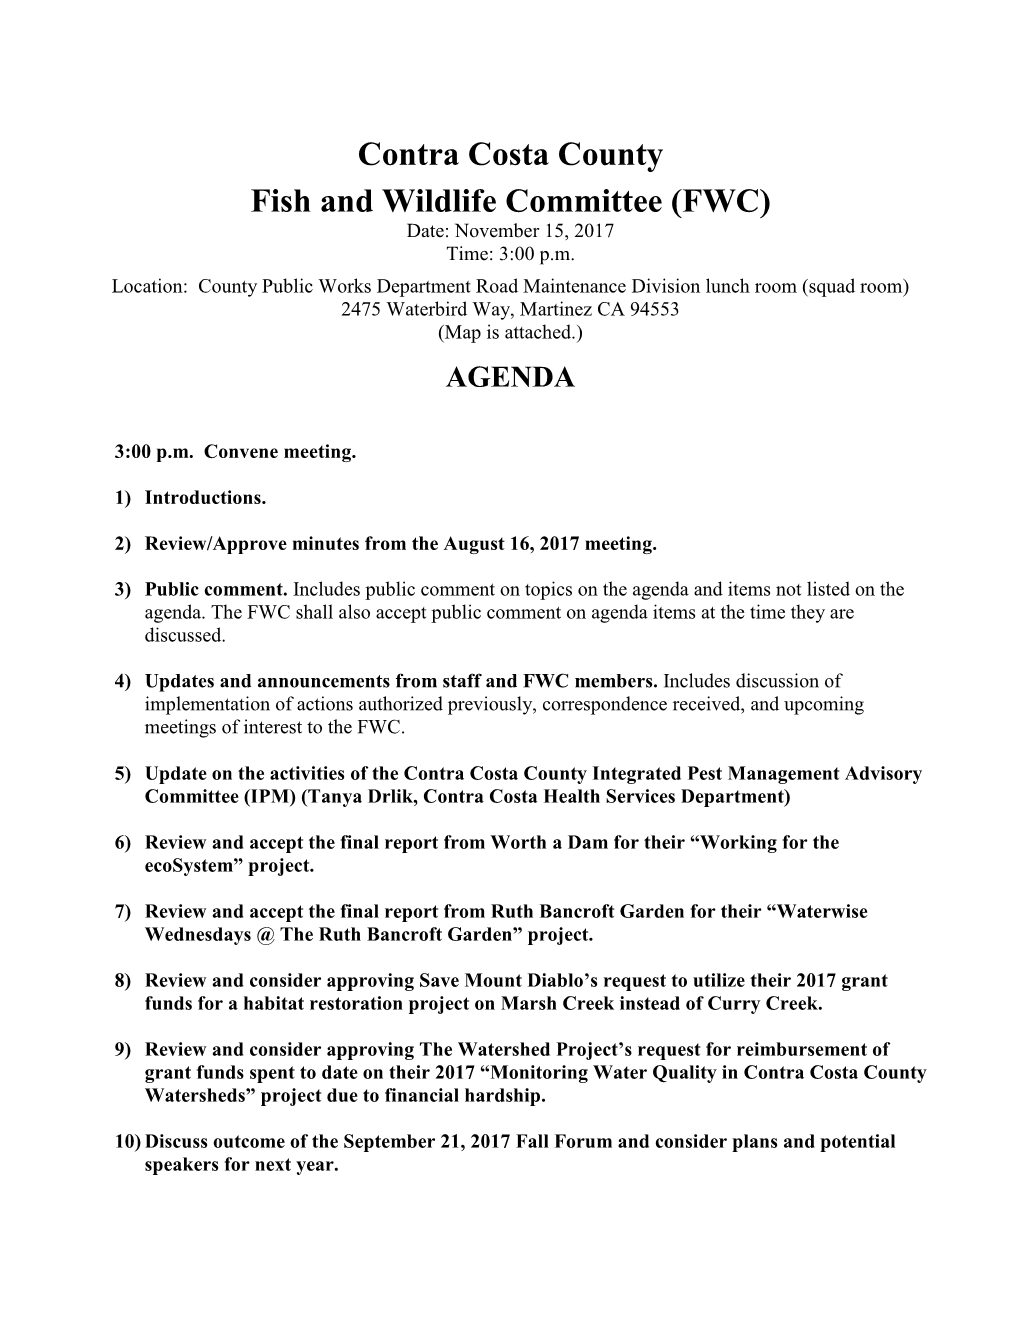 Contra Costa County Fish and Wildlife Committee (FWC) Date: November 15, 2017 Time: 3:00 P.M